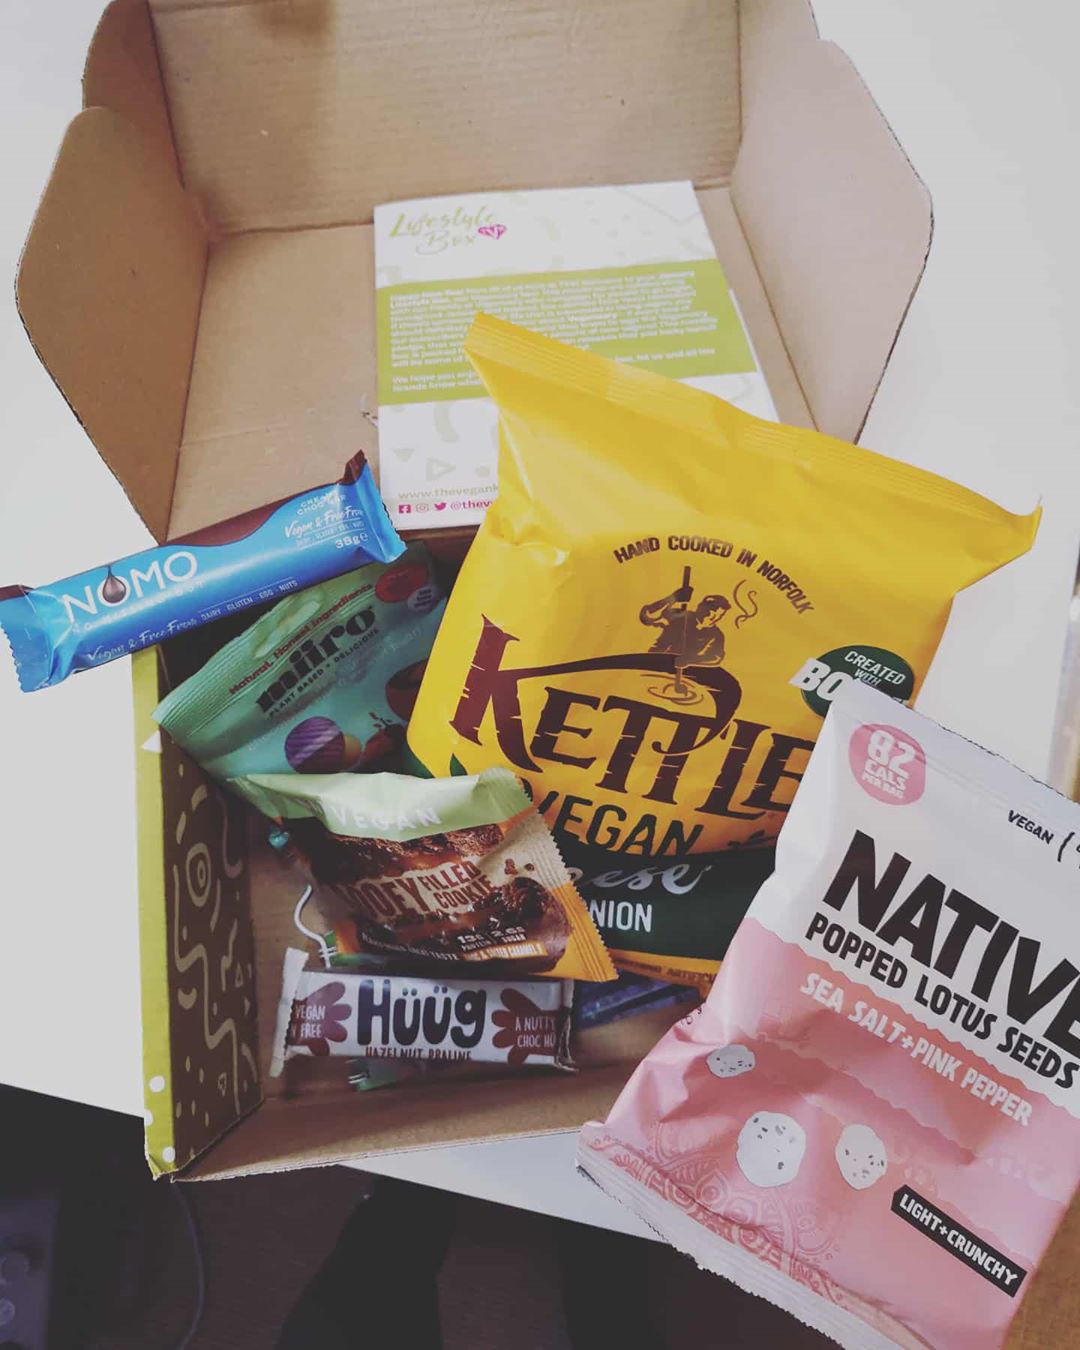 Here’s what’s inside our first Veganuary box!

We look forward to enjoying the goodies and learning what brands we can enjoy in January and beyond 
@kettlechipsuk
@mirro_uk
@nomochocolate
@huuglife
@myvegan
@wearenativesnacks

#veganuary #davisonwilliams #plantbased